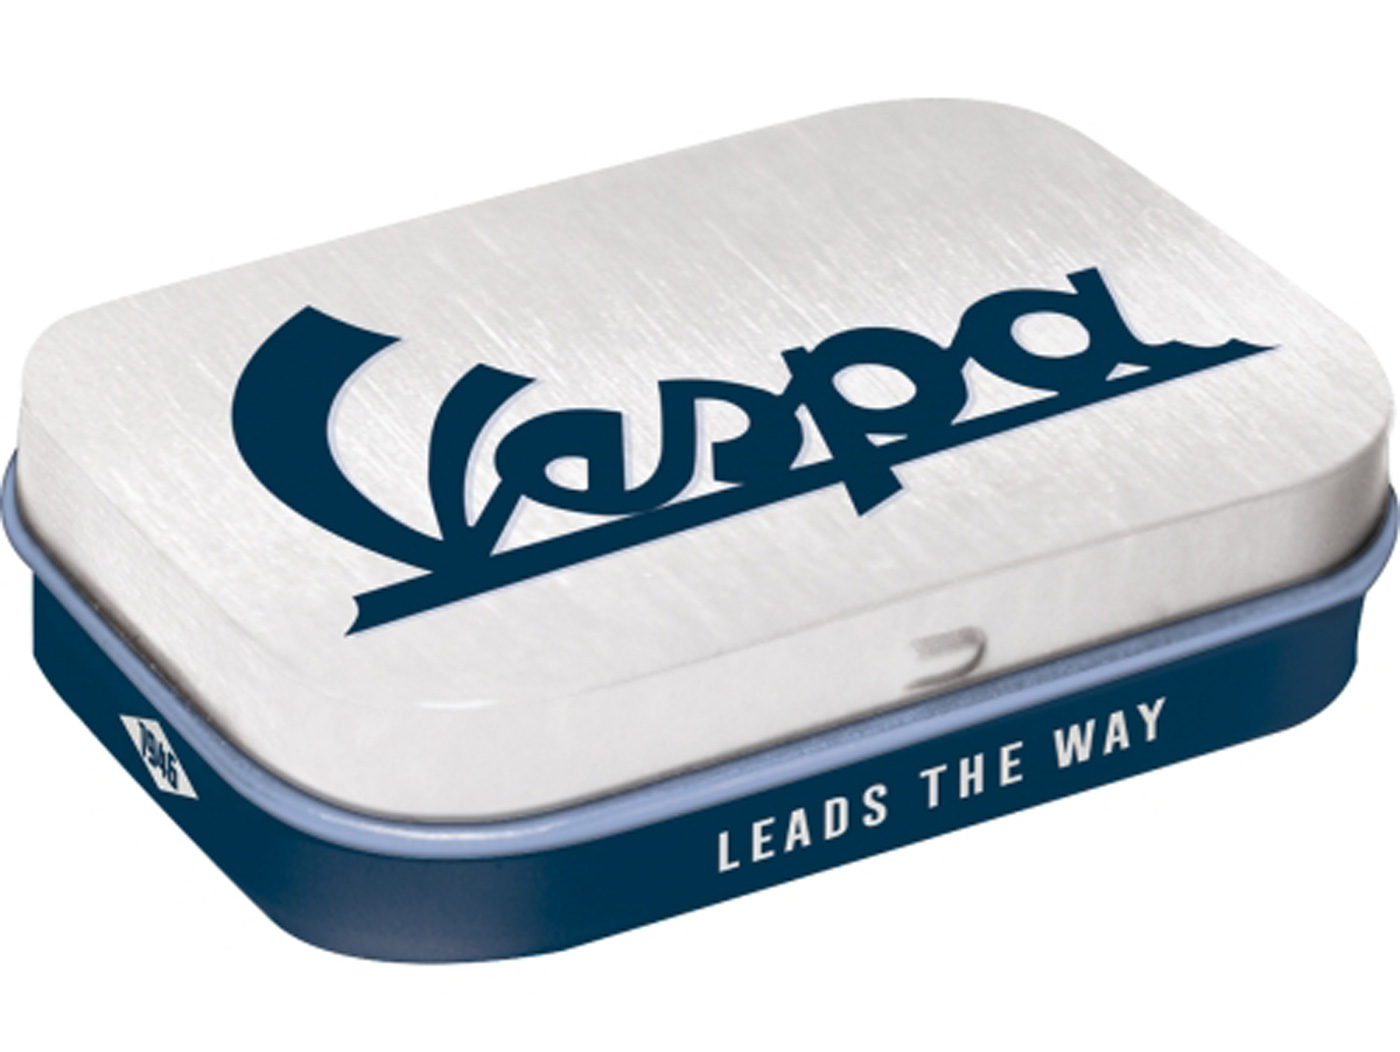 Mint box Vespa "Leads The Way" Perfect for a gift